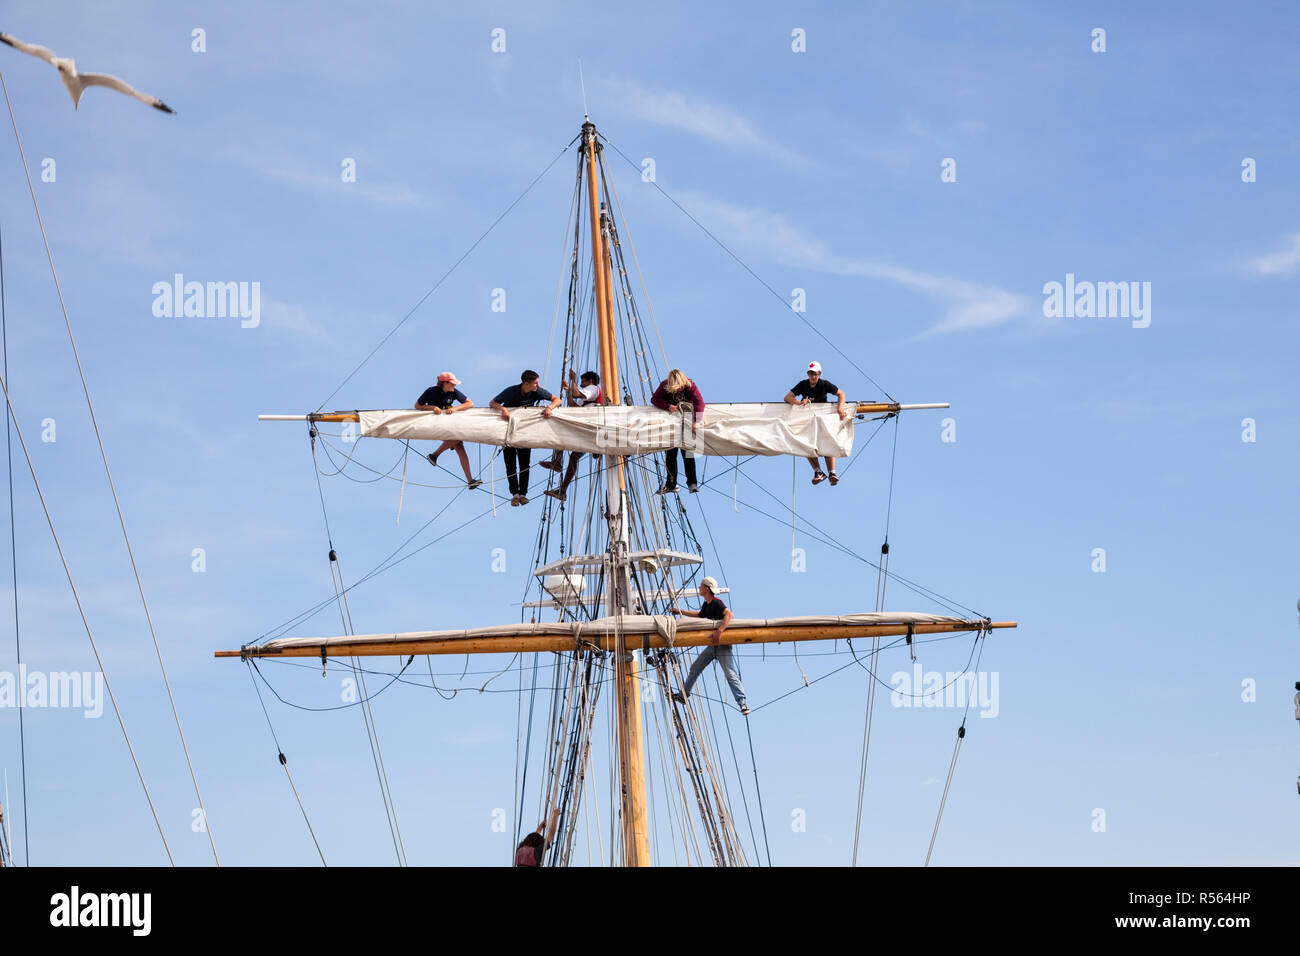 Crew members fixing the sail of the TS Playfair which is a  traditionally-rigged brigantine training ship owned by Toronto Brigantine Inc. City of Tor Stock Photo